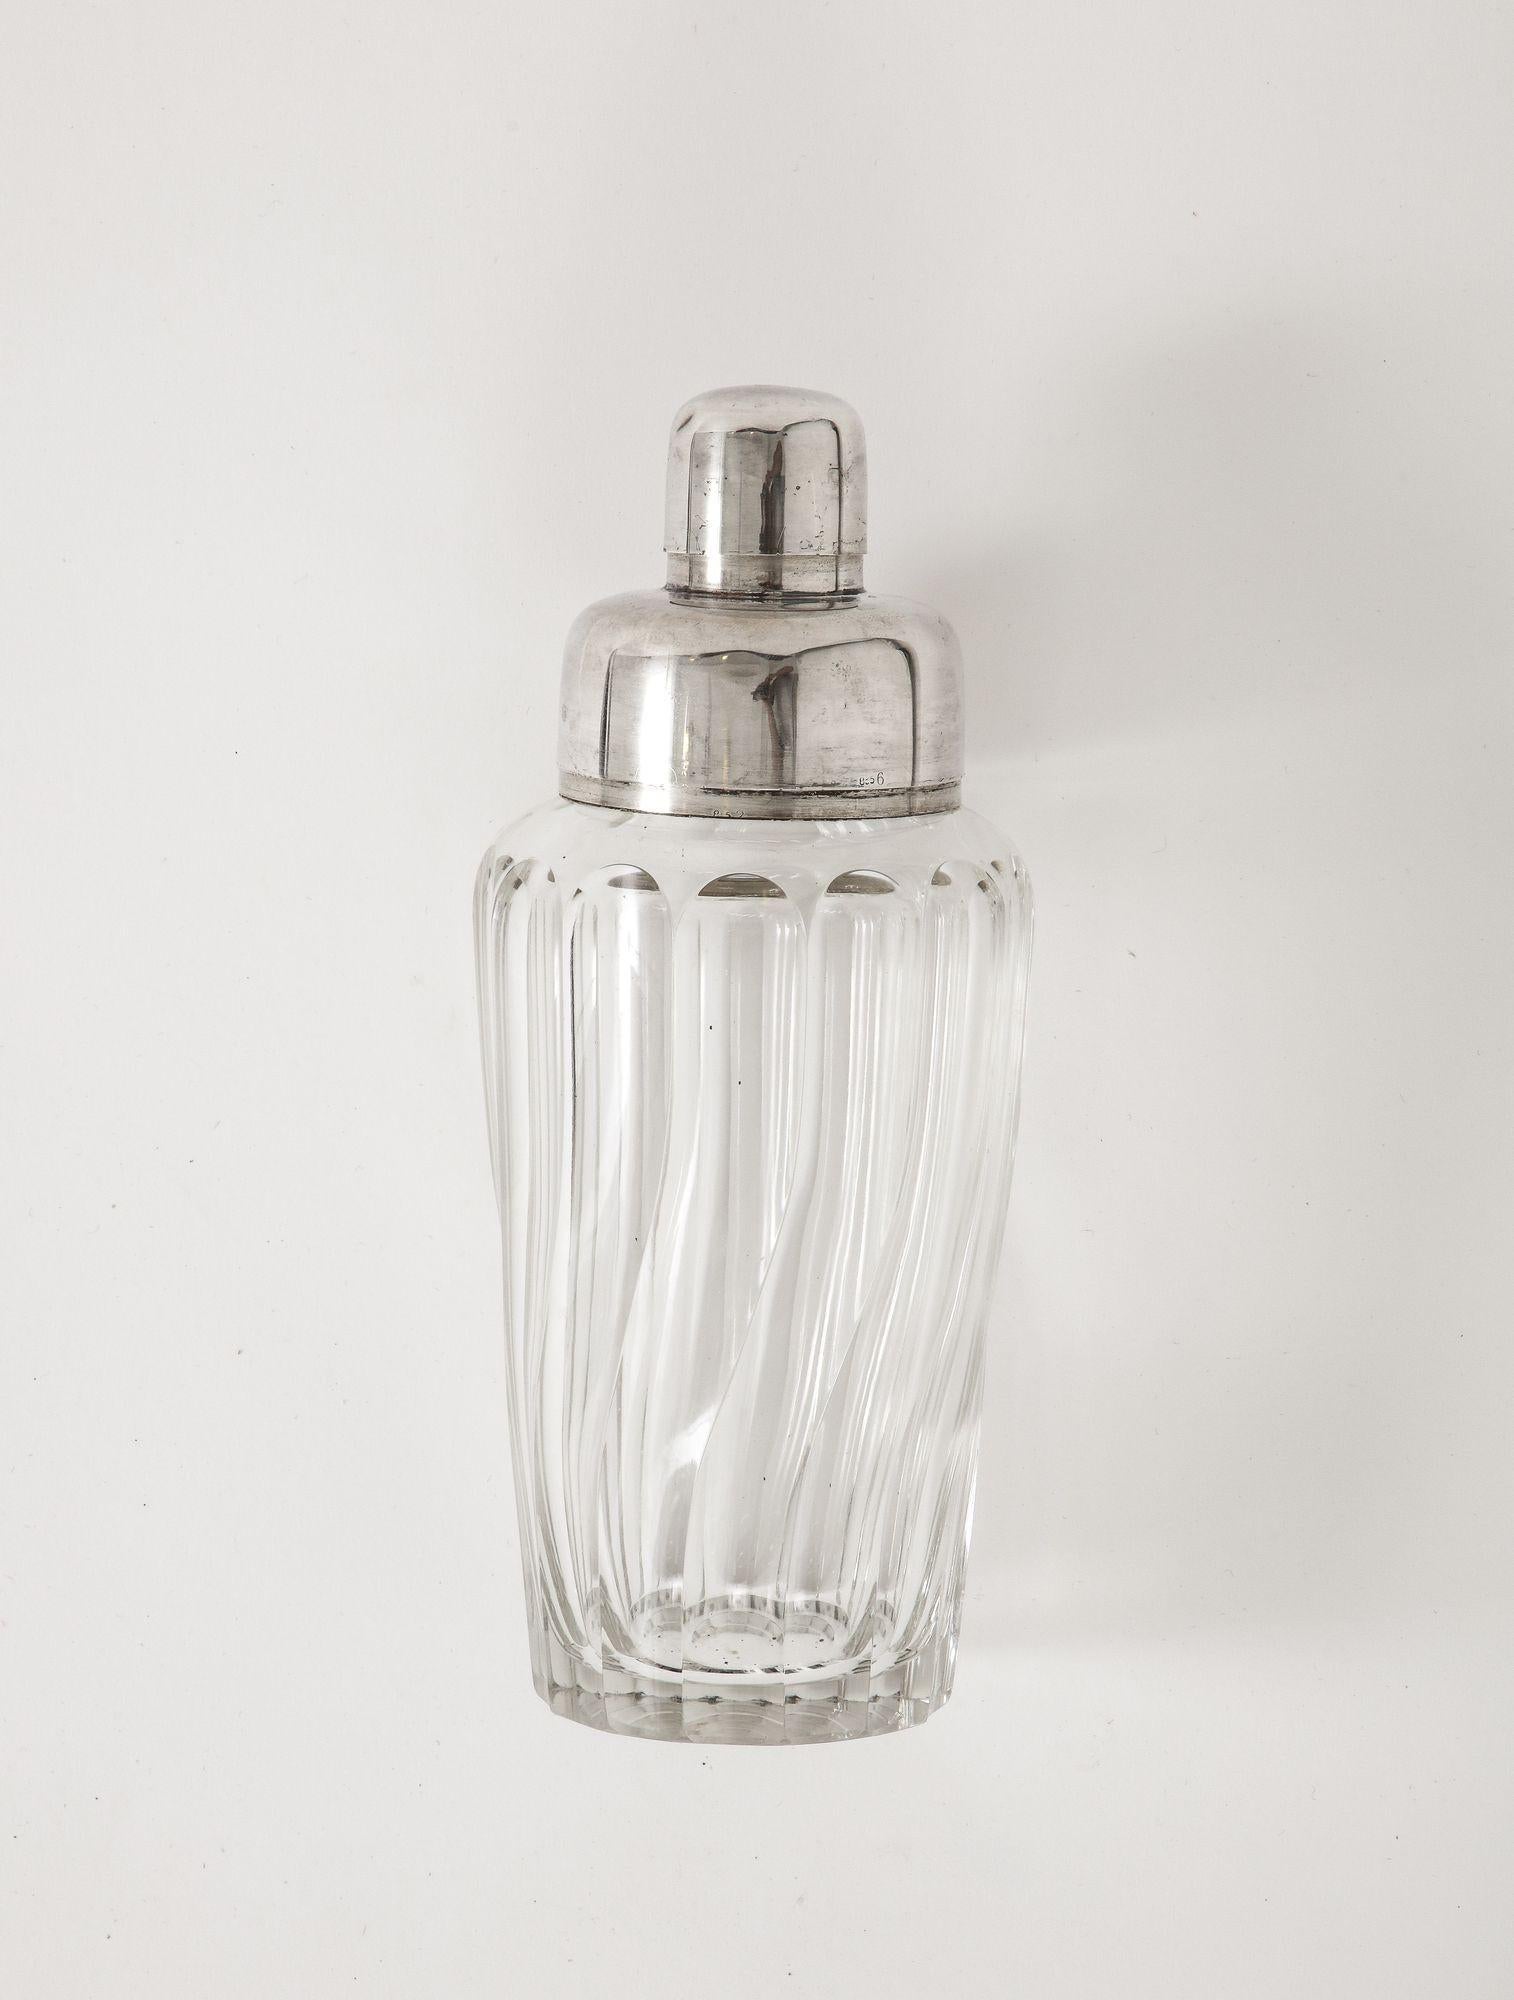 Art Deco French Crystal and Silver Plate Cocktail Shaker with twist form

